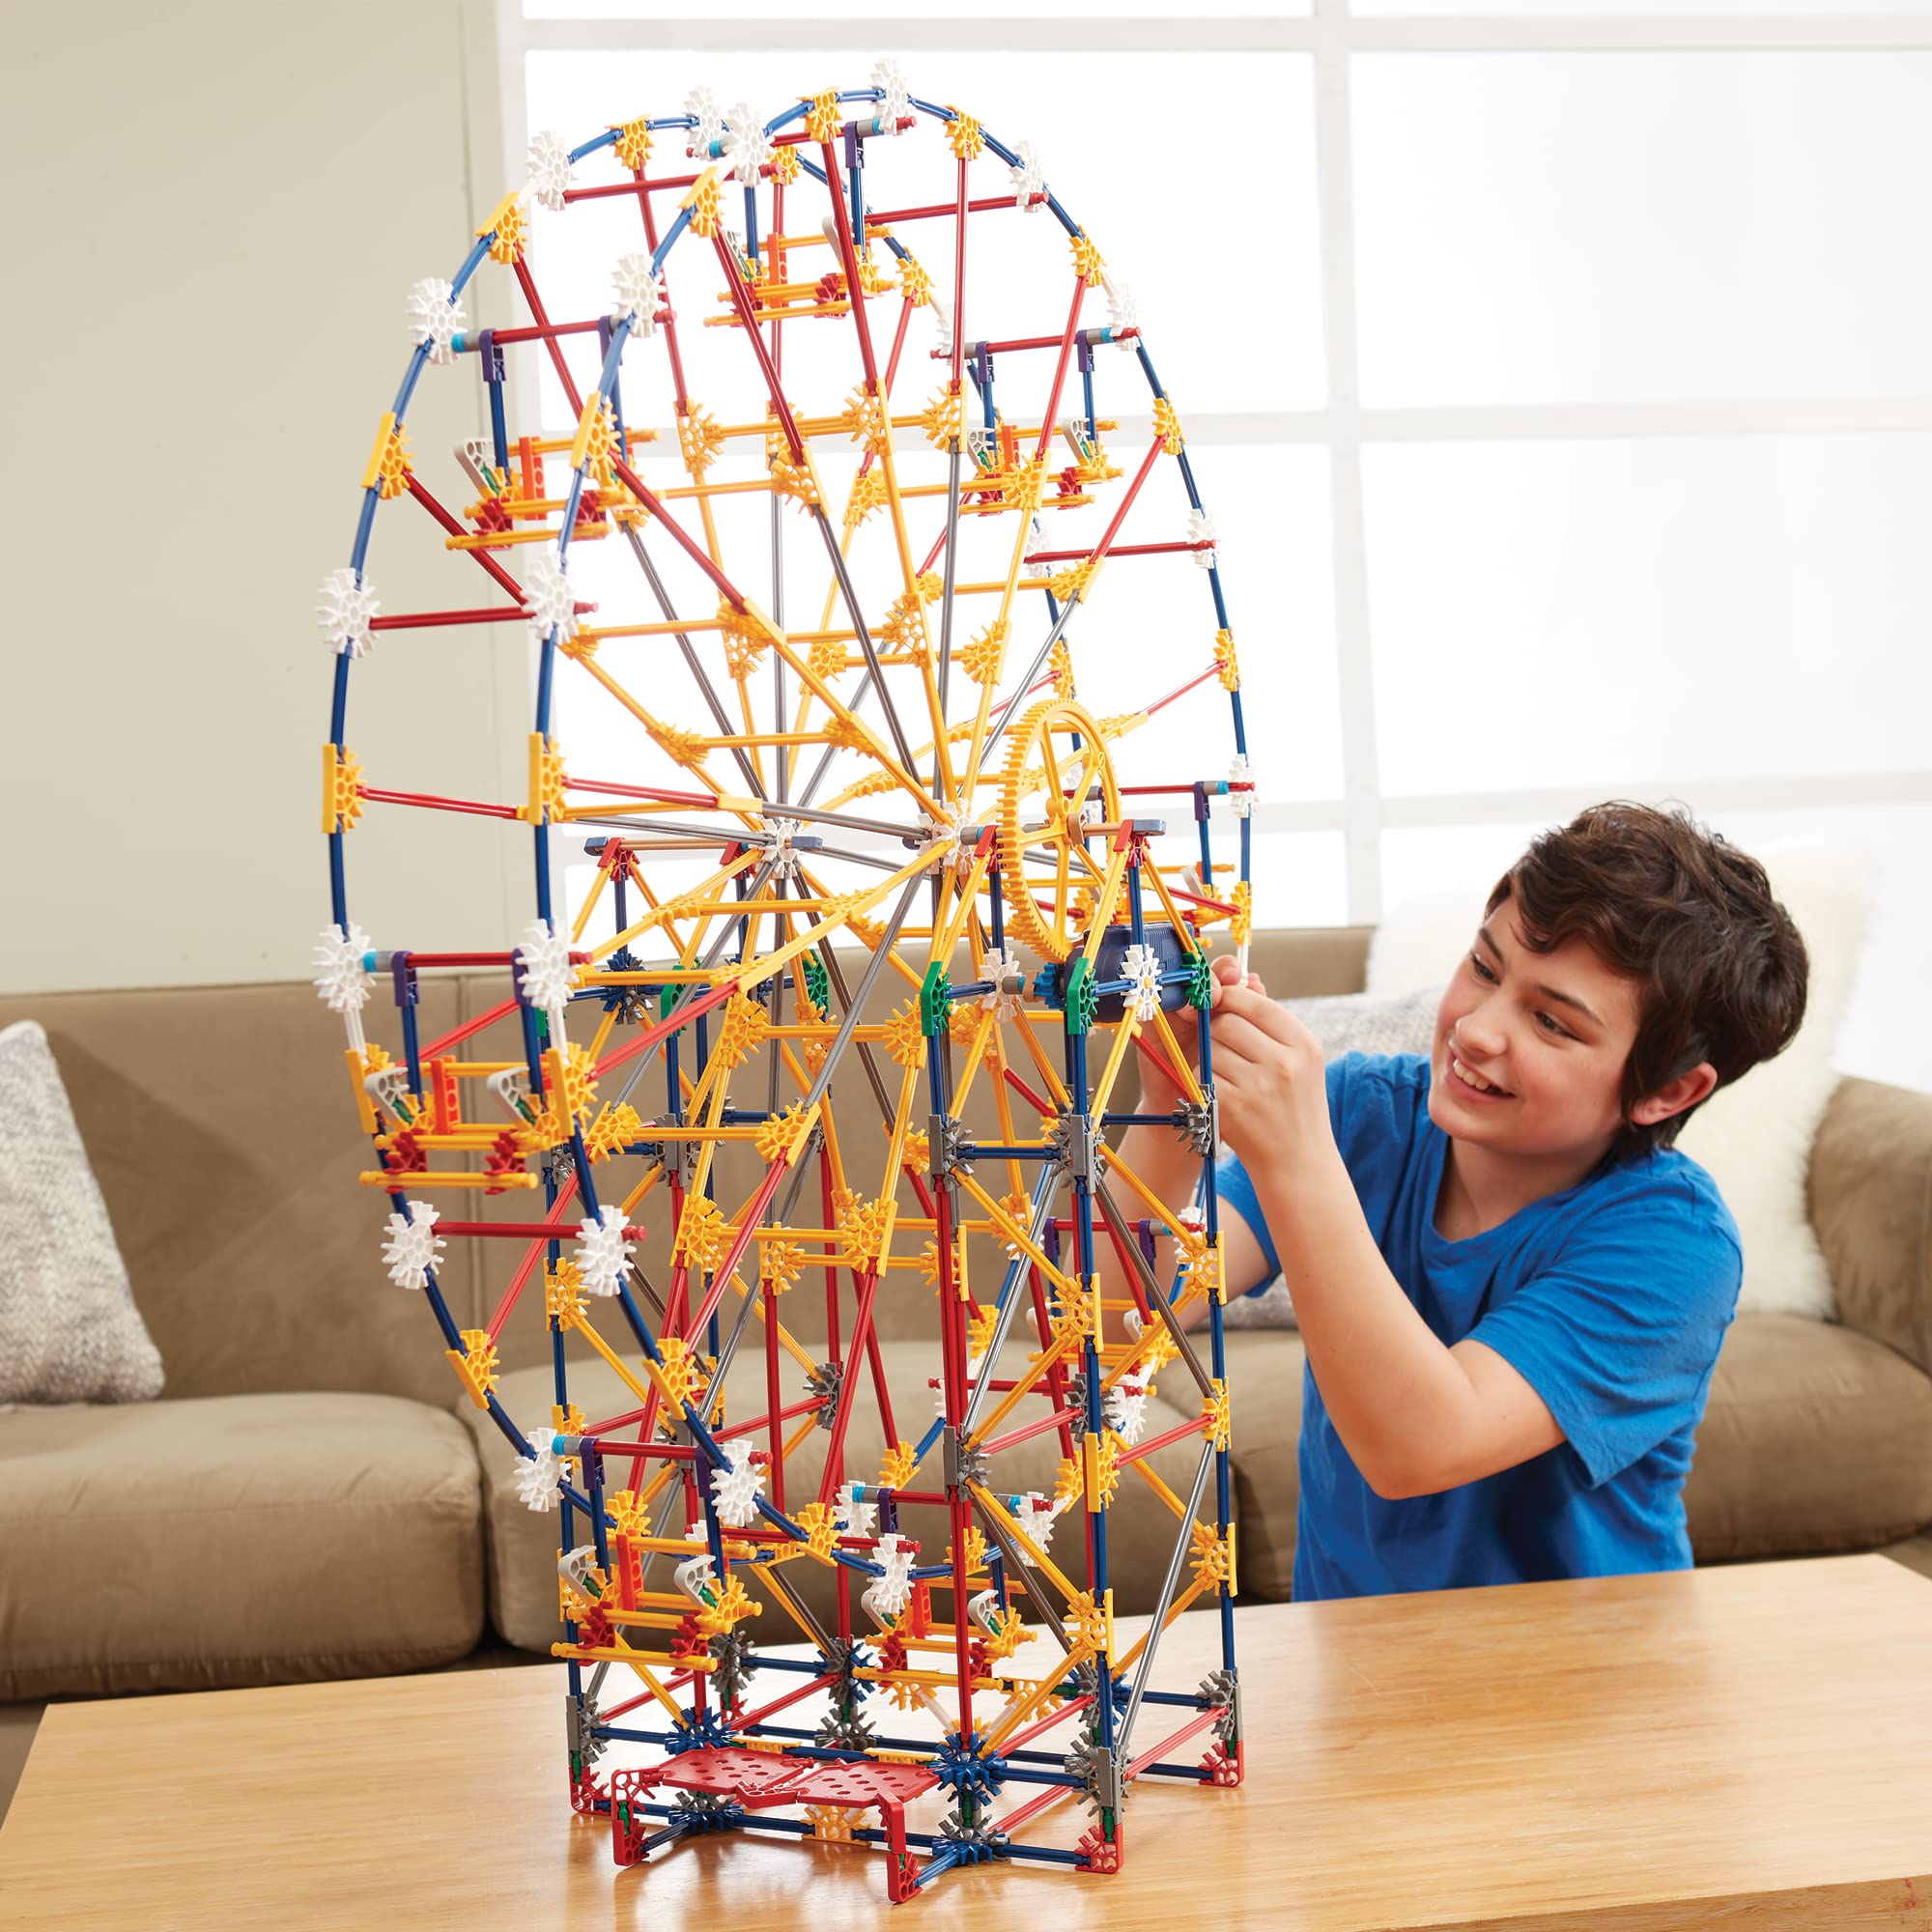 K'NEX Thrill Rides - 3-in-1 Classic Amusement Park Building Set, for 9 - 15 years, Includes 744 Construction Components, Instructions, Multicolor